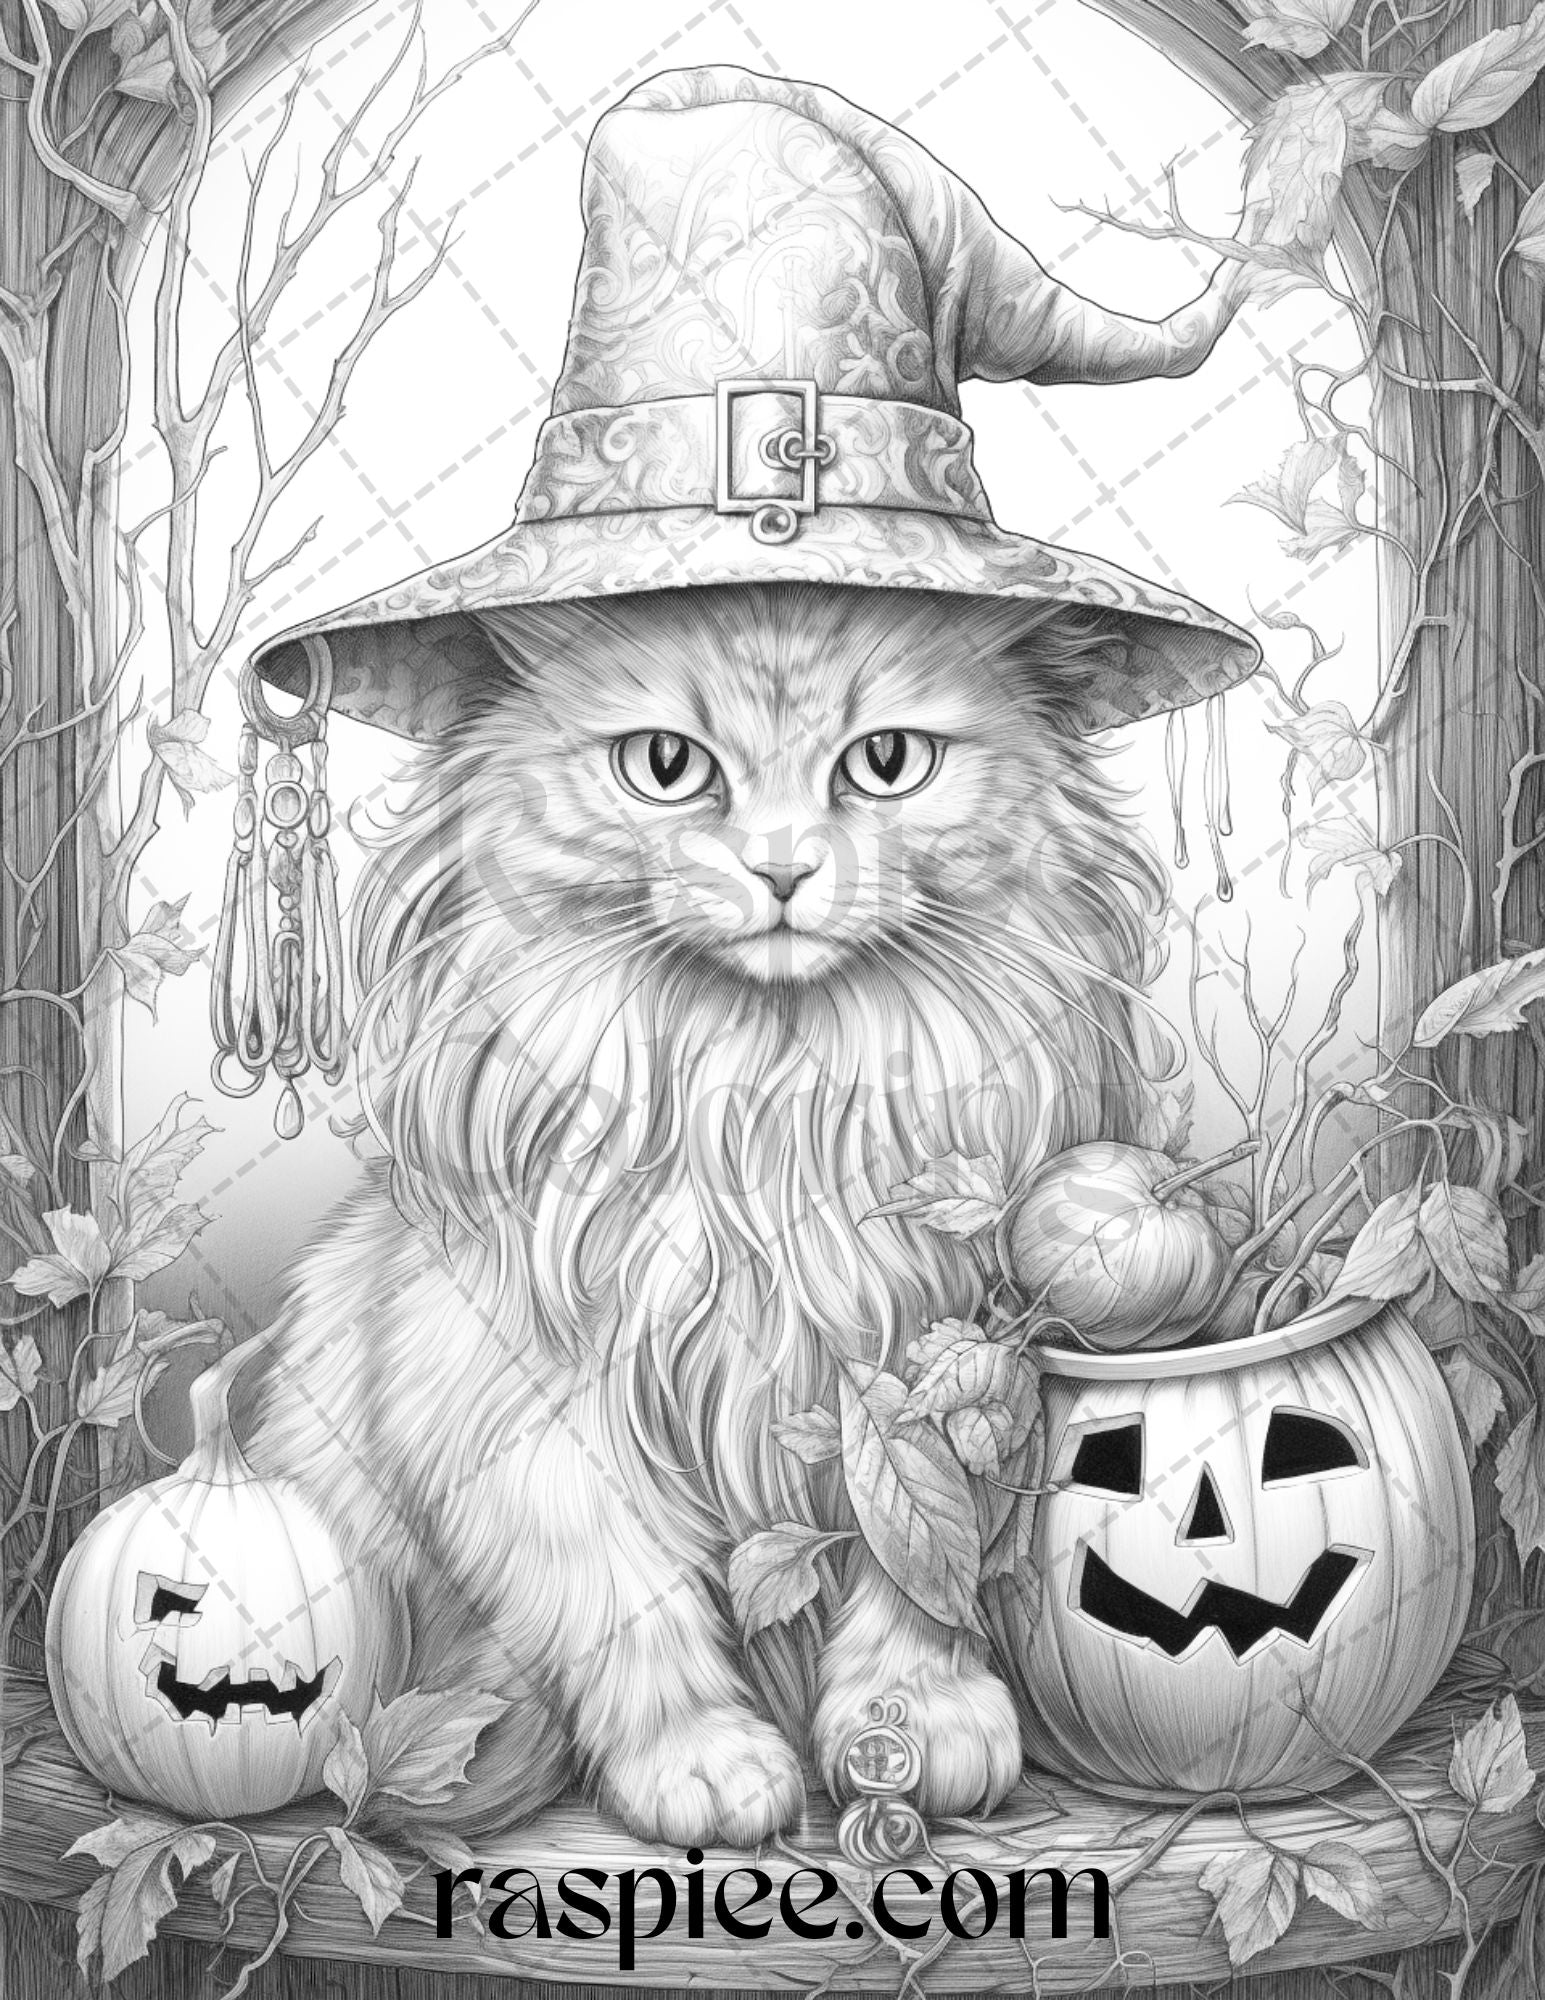 Downloadable Coloring Page Witch and Cats Halloween Fun Coloring Books  Adults/digital/digi/stamps/cat 